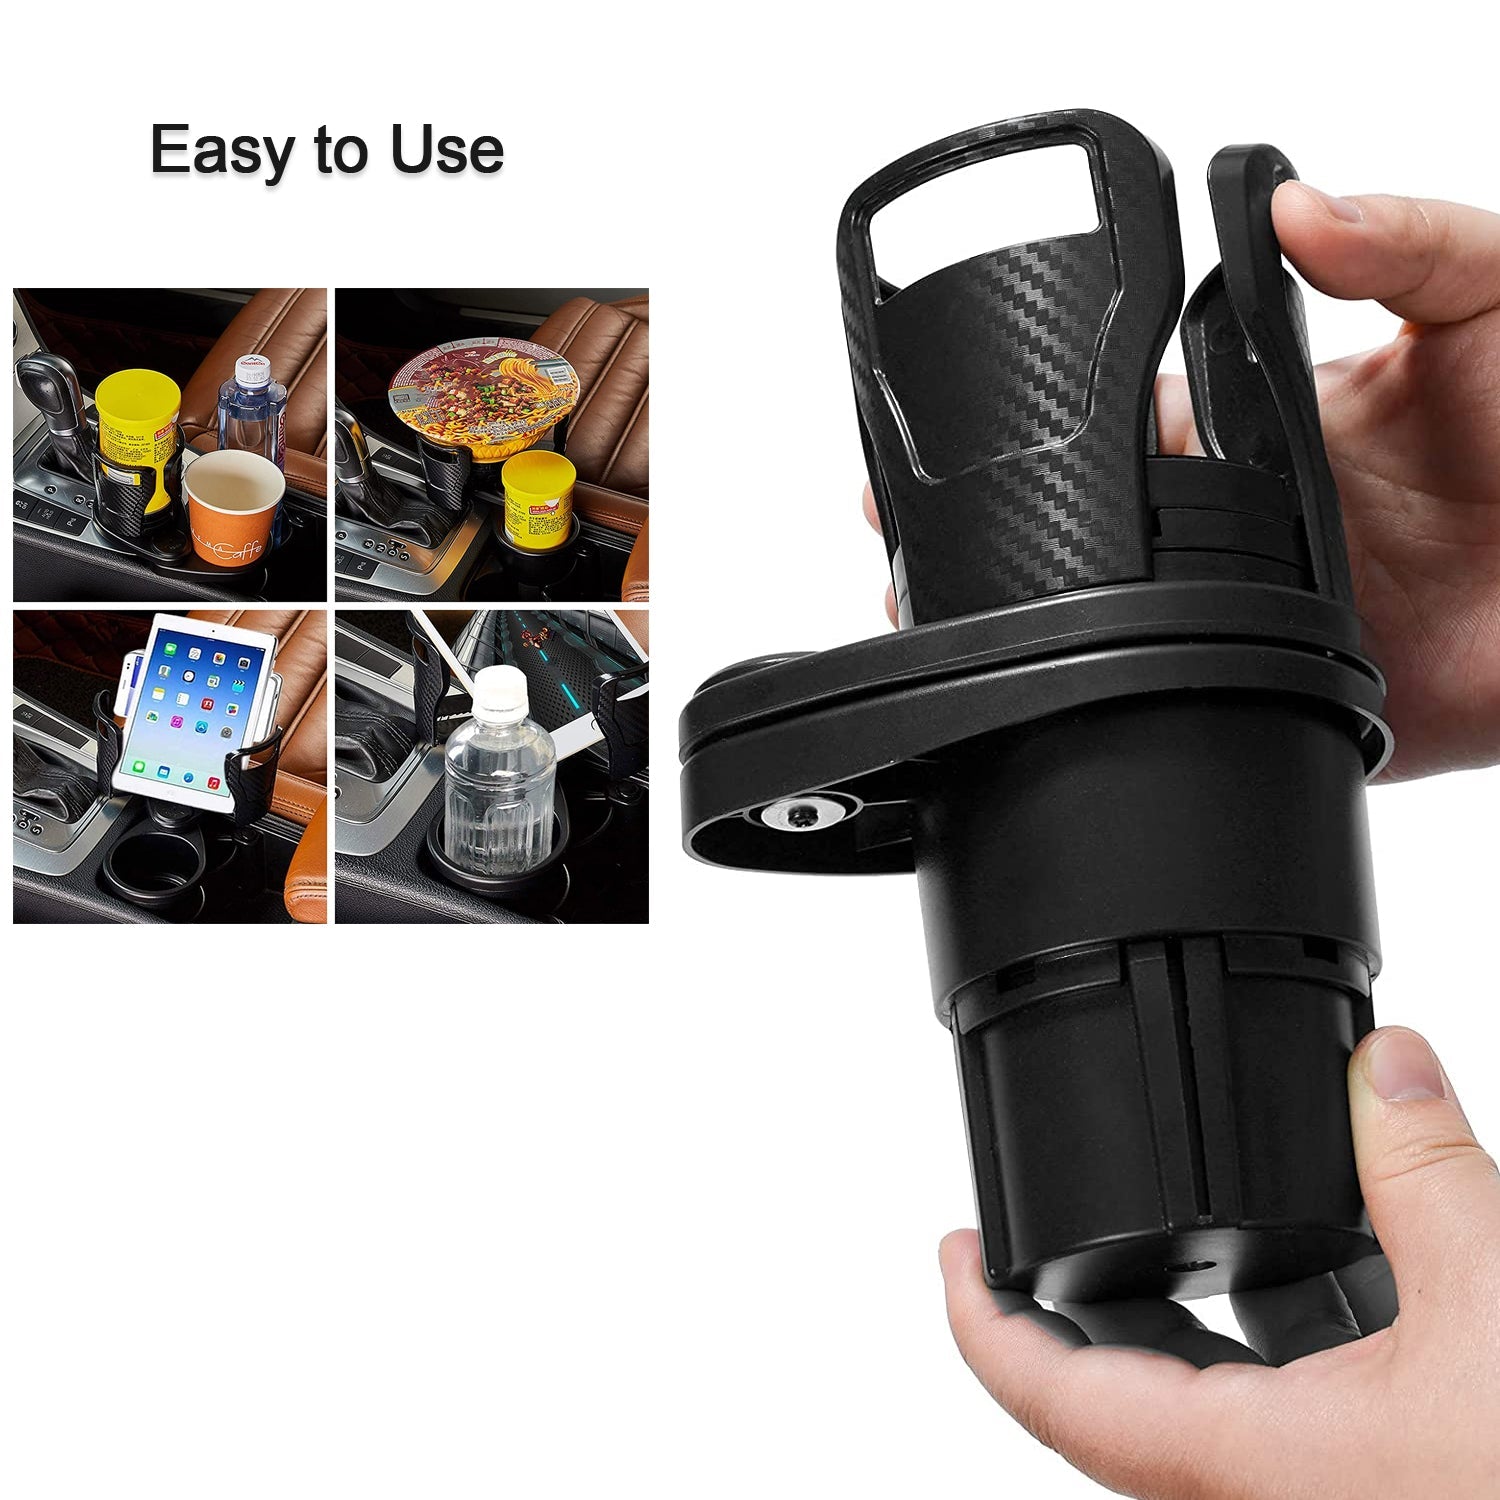 7623 Cup Holder, Seat Cup Holder Suitable for 20oz Water Bottles 2 in 1 Cup Holder Universal Vehicle Seat Bottle Mount with Set of Sponge Cushion for Vehicle 